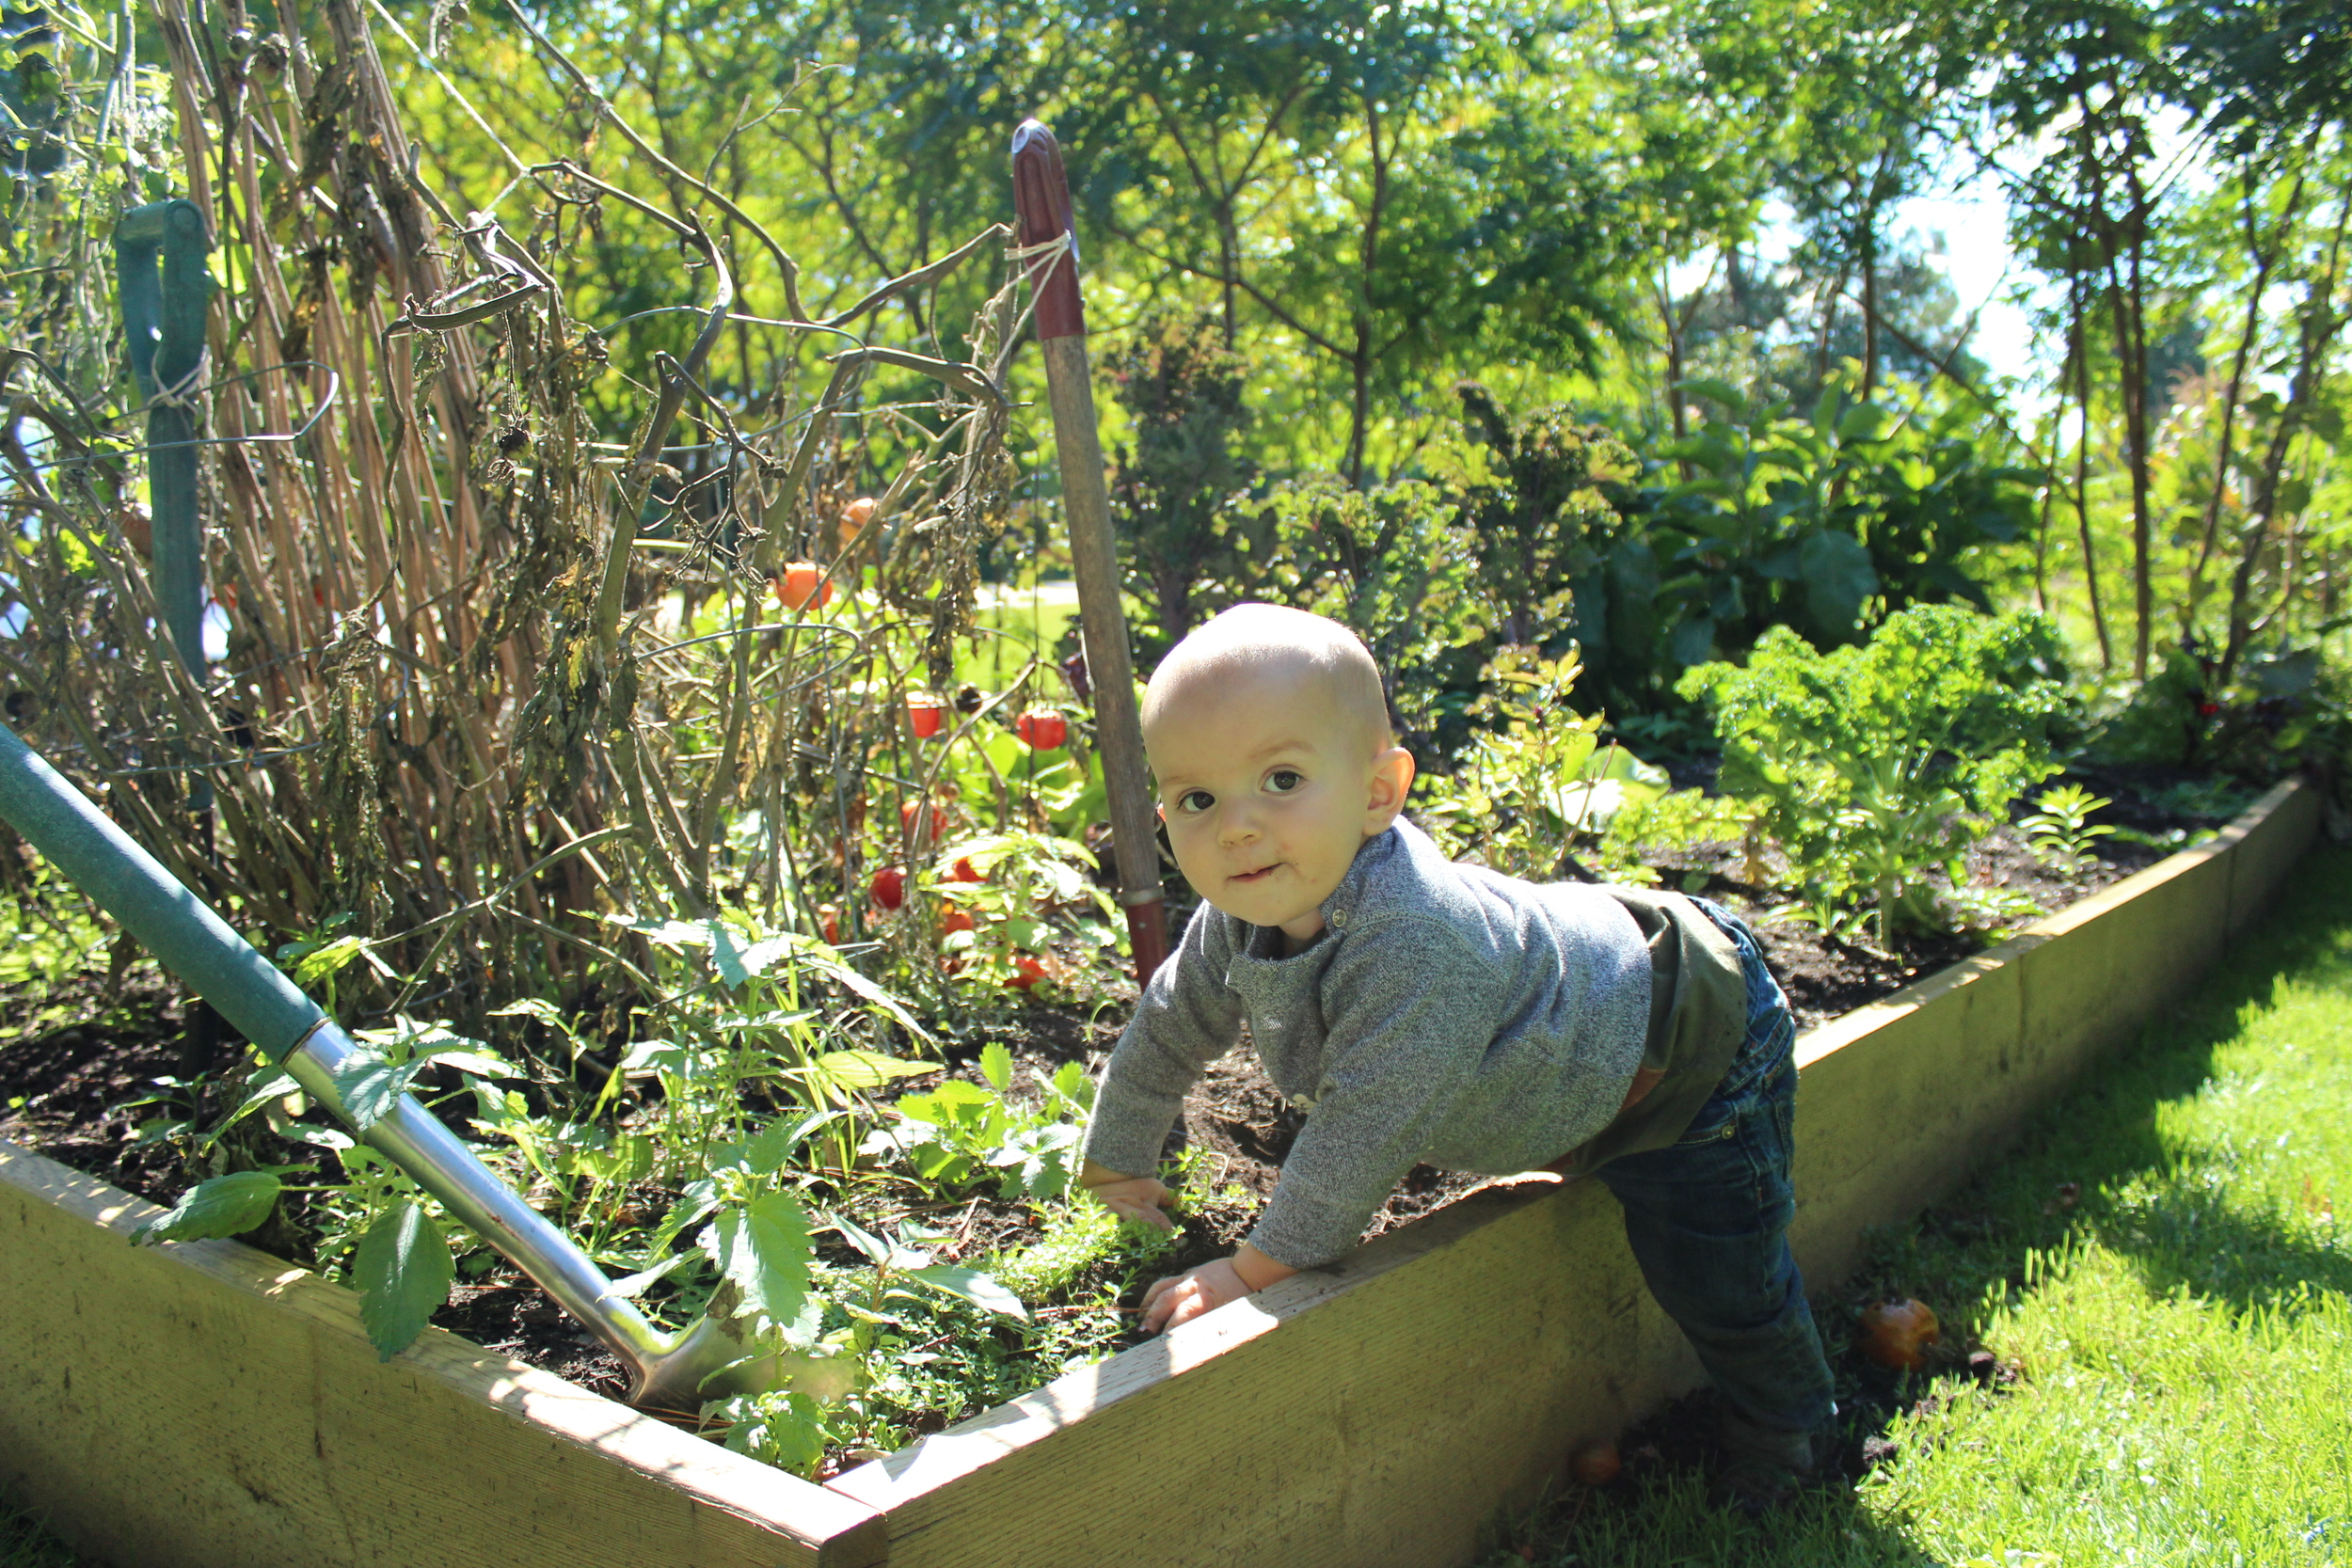   Our official little foodie, working in the garden! In the growing season, most of our produce comes from local organic farmers, Amy &amp; Graham of Fiddlefoot Farm.&nbsp;  